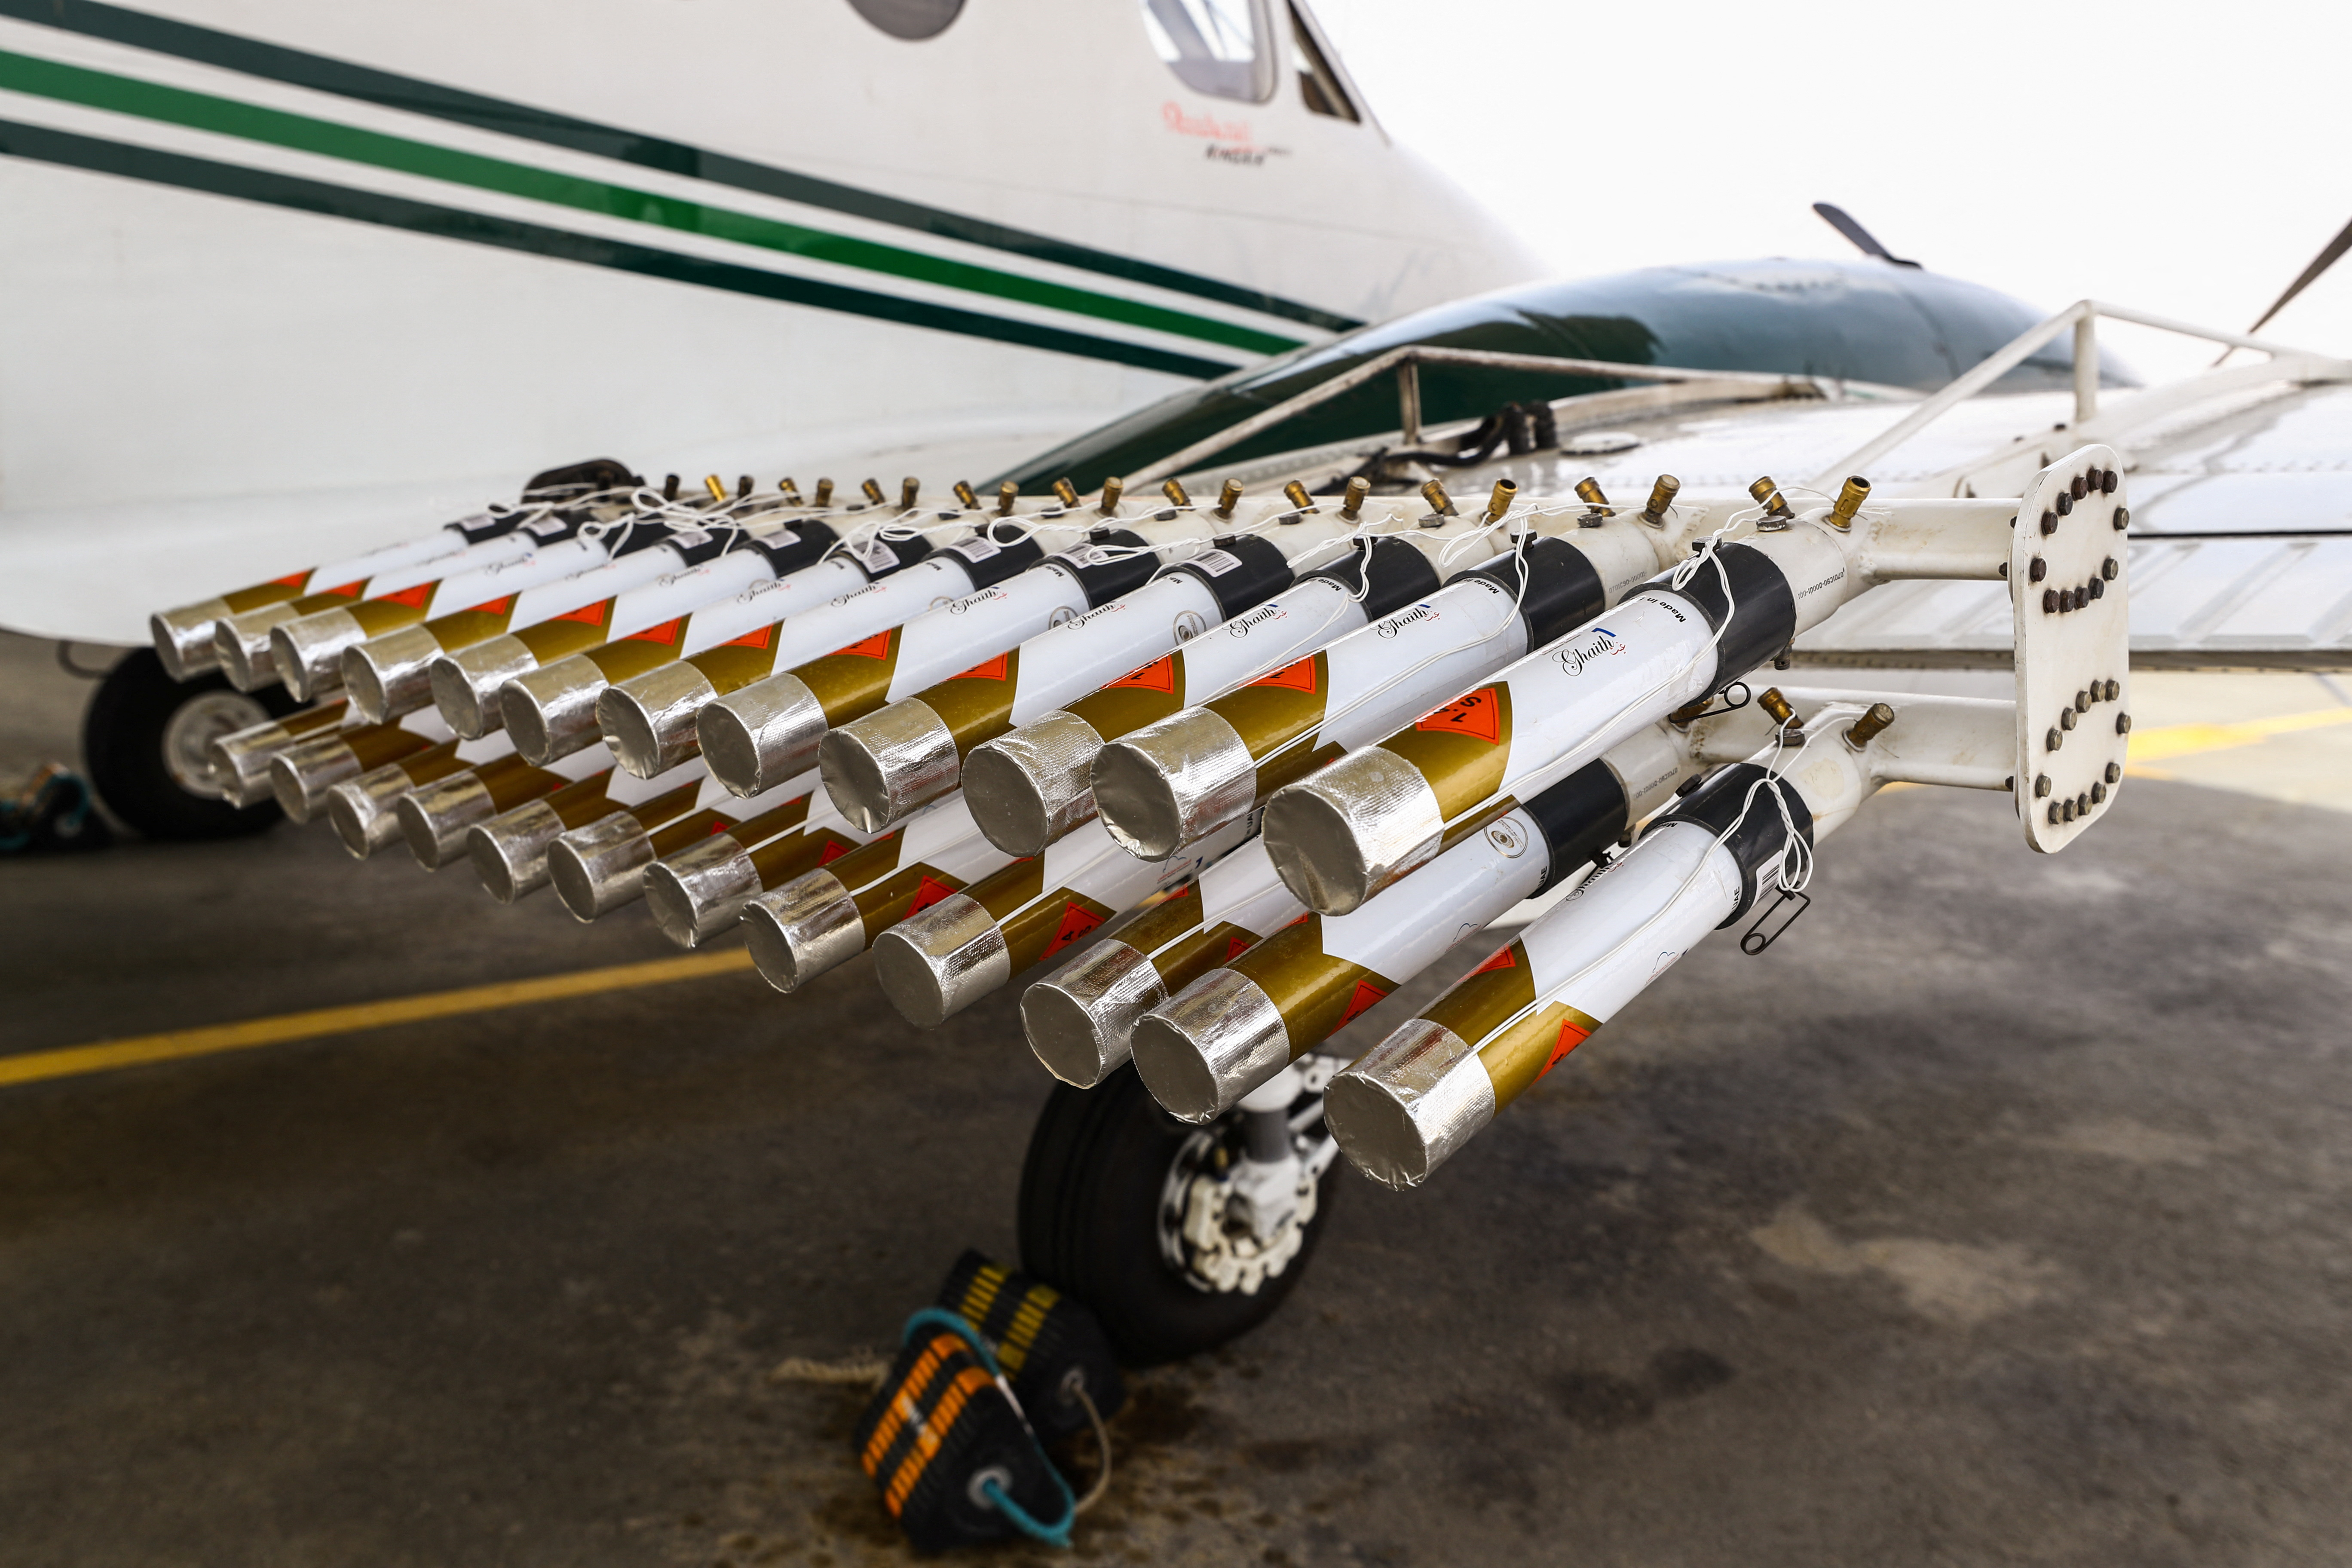 Hygroscopic flares are attached to an aircraft ahead of a cloud seeding flight in United Arab Emirates